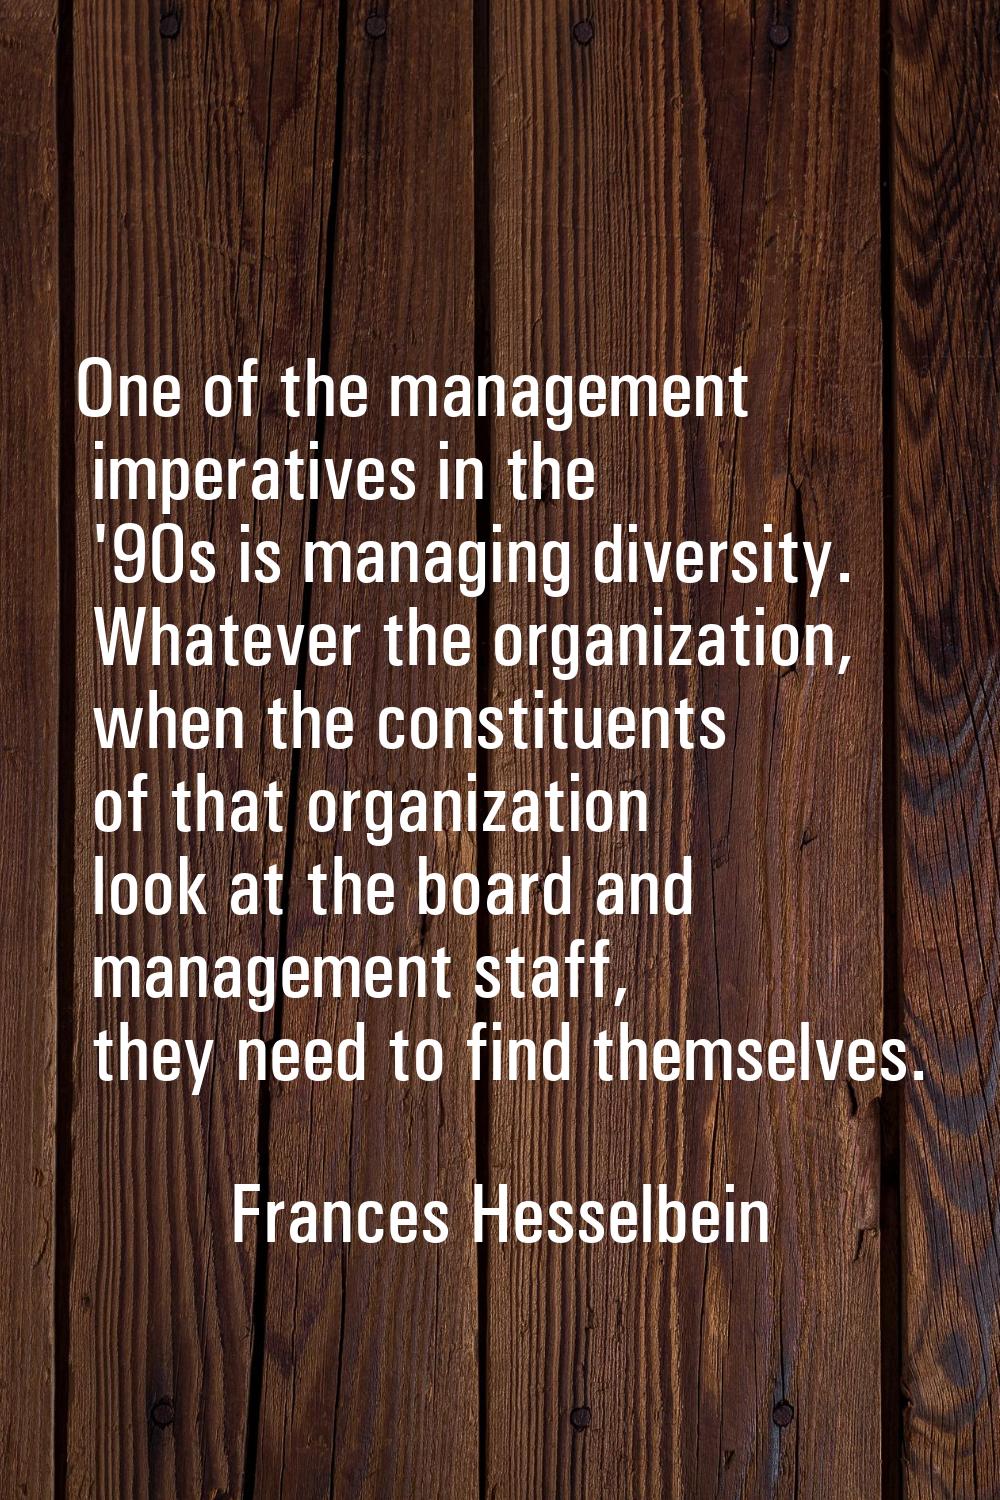 One of the management imperatives in the '90s is managing diversity. Whatever the organization, whe